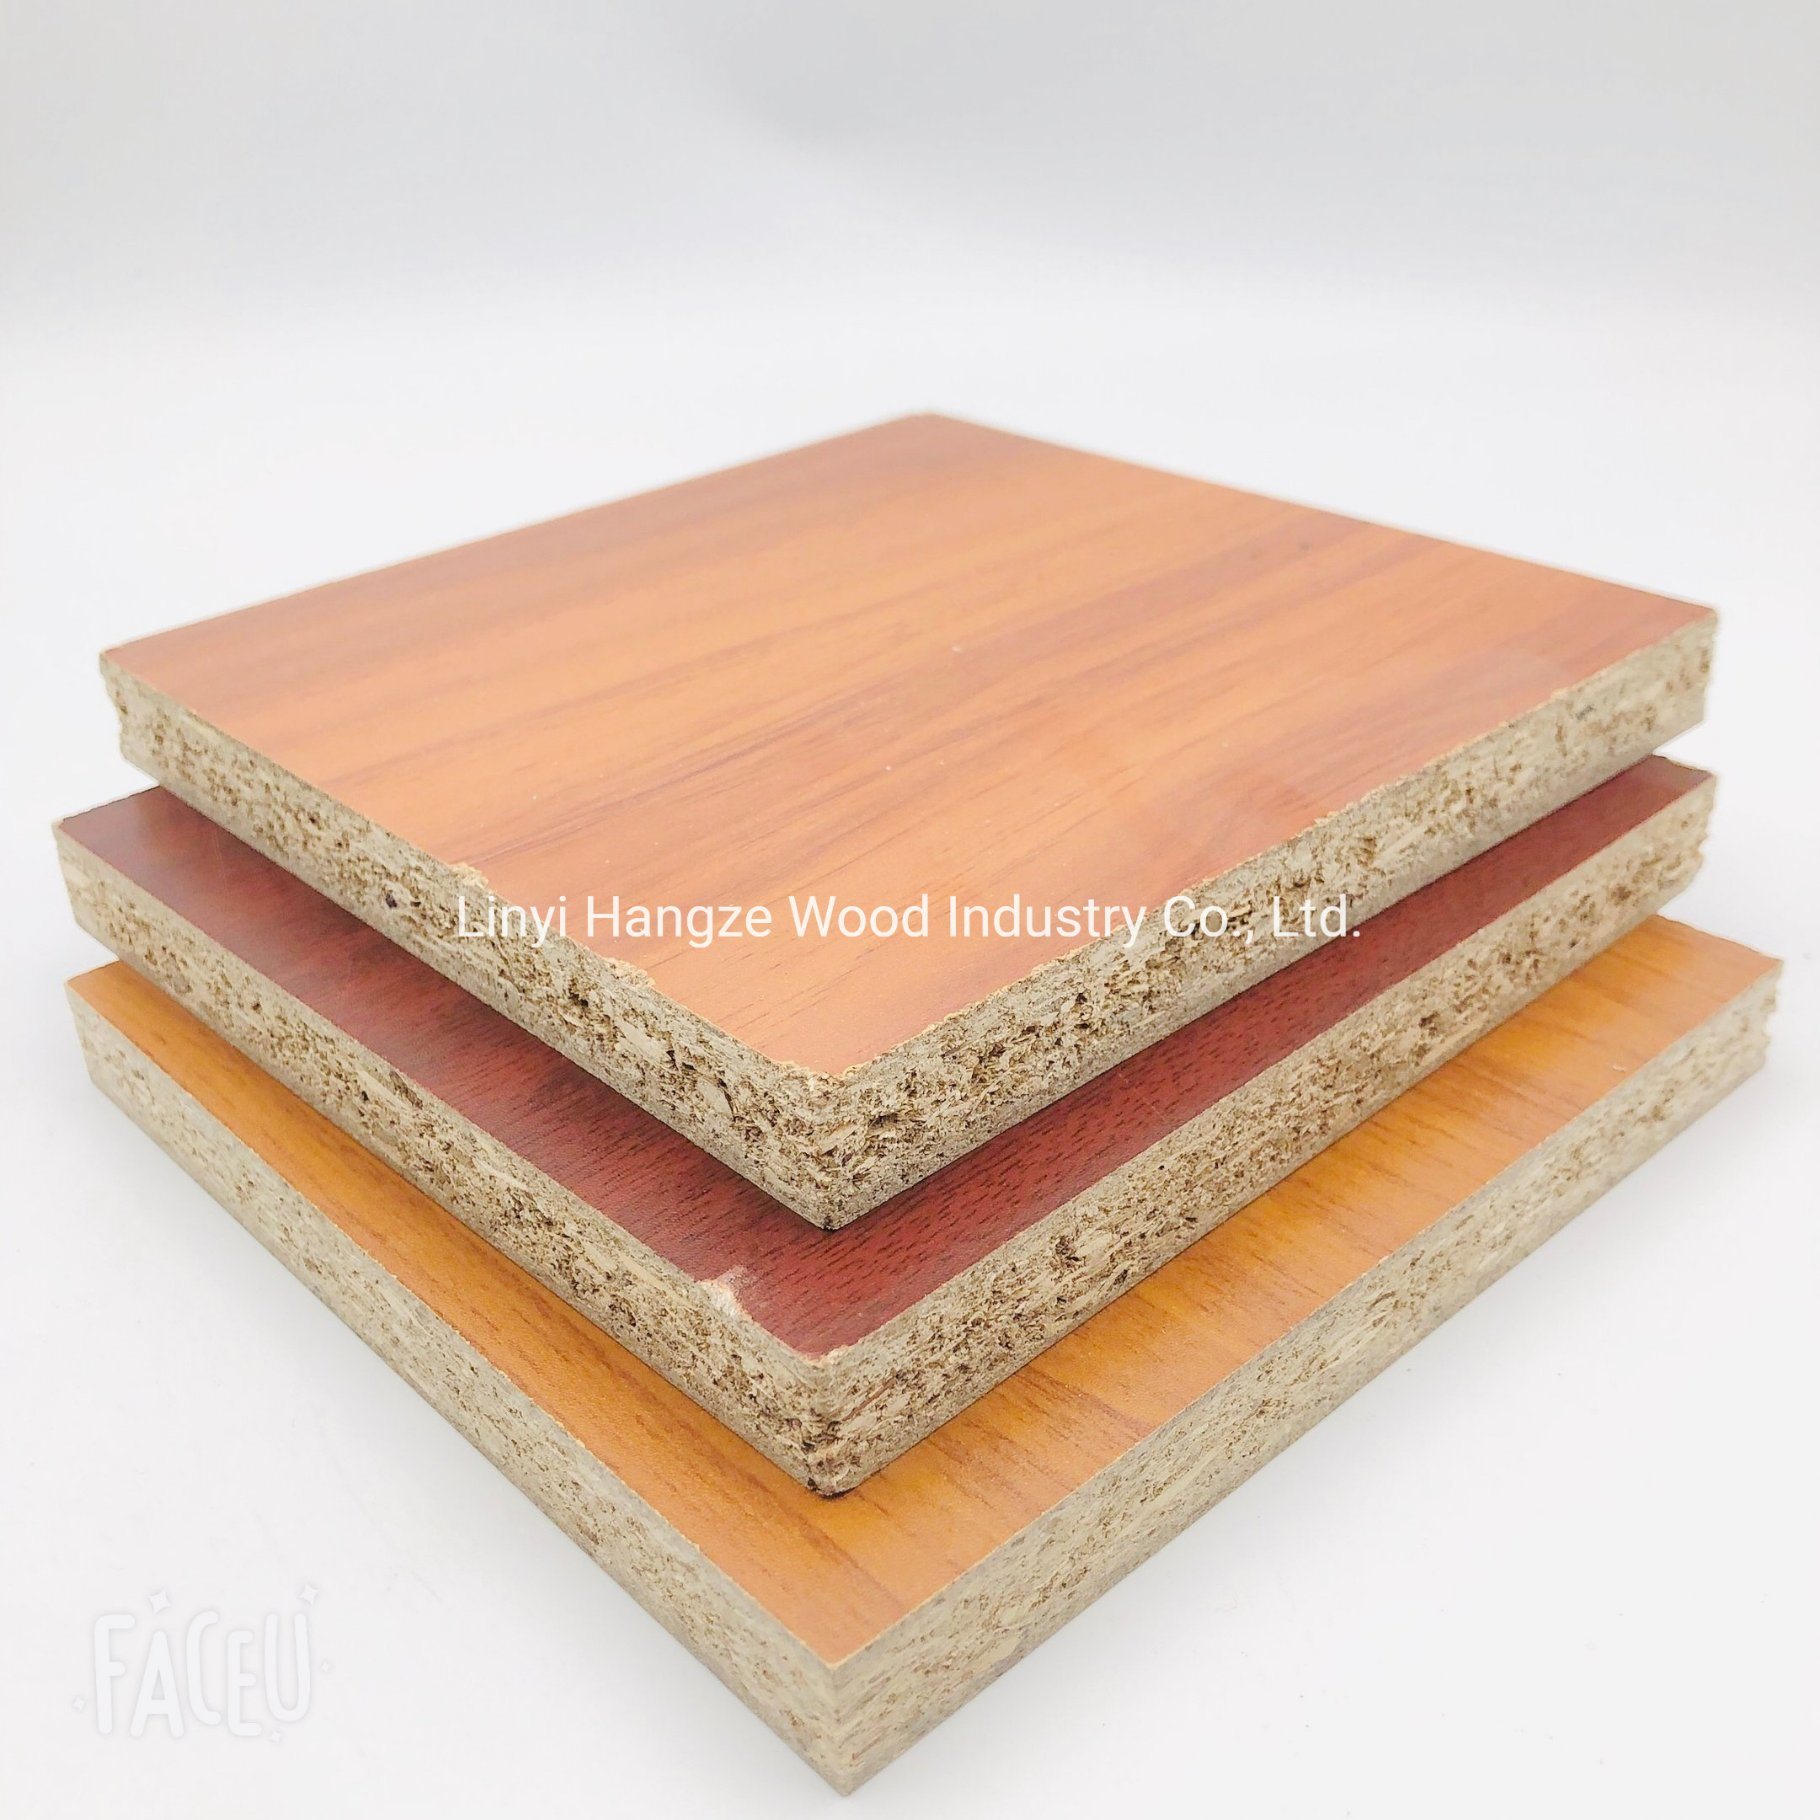 12mm Double Melamine Faced Particle Board Manufacture